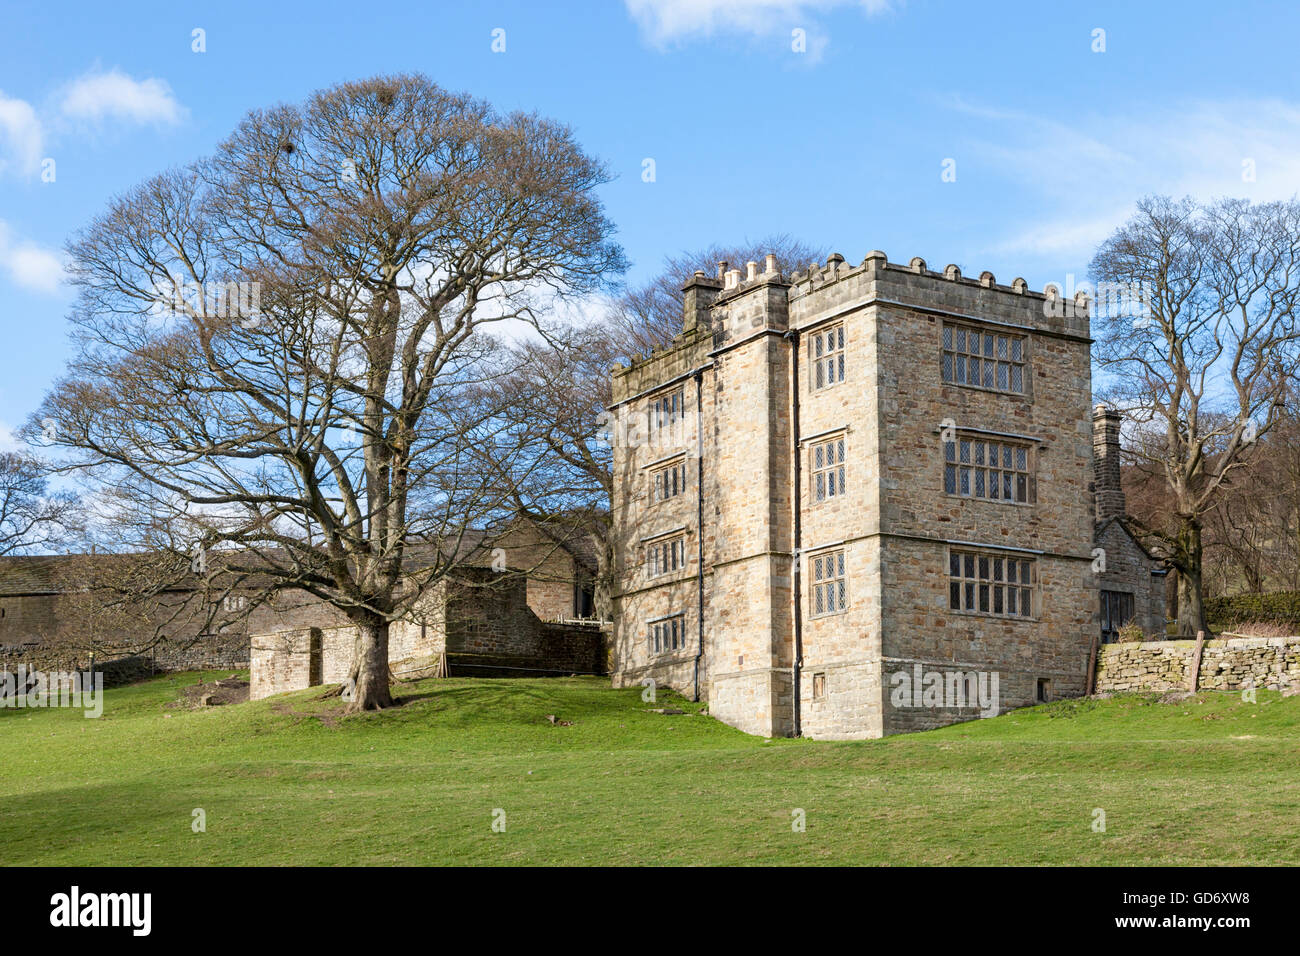 A Grade II listed 16th Century Tower House. North Lees Hall, near Hathersage, Derbyshire, Peak District, England, UK Stock Photo